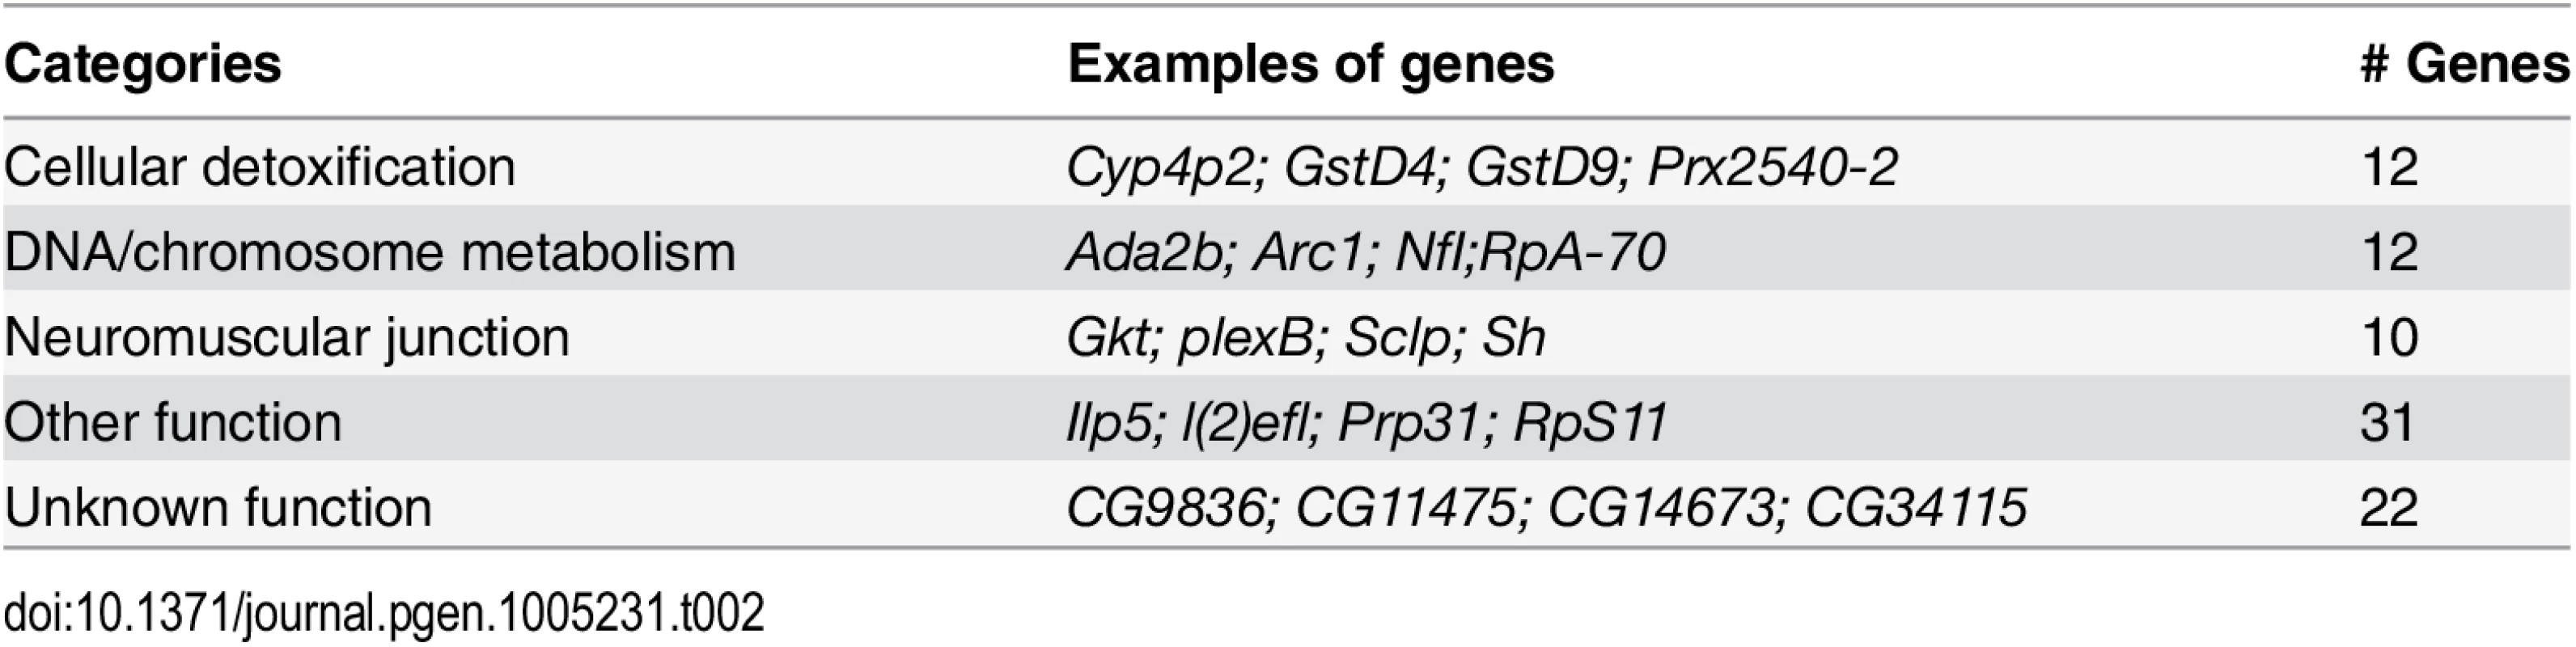 Categories of mis-regulated genes differentially expressed in wild type Lamin C vs G489V.